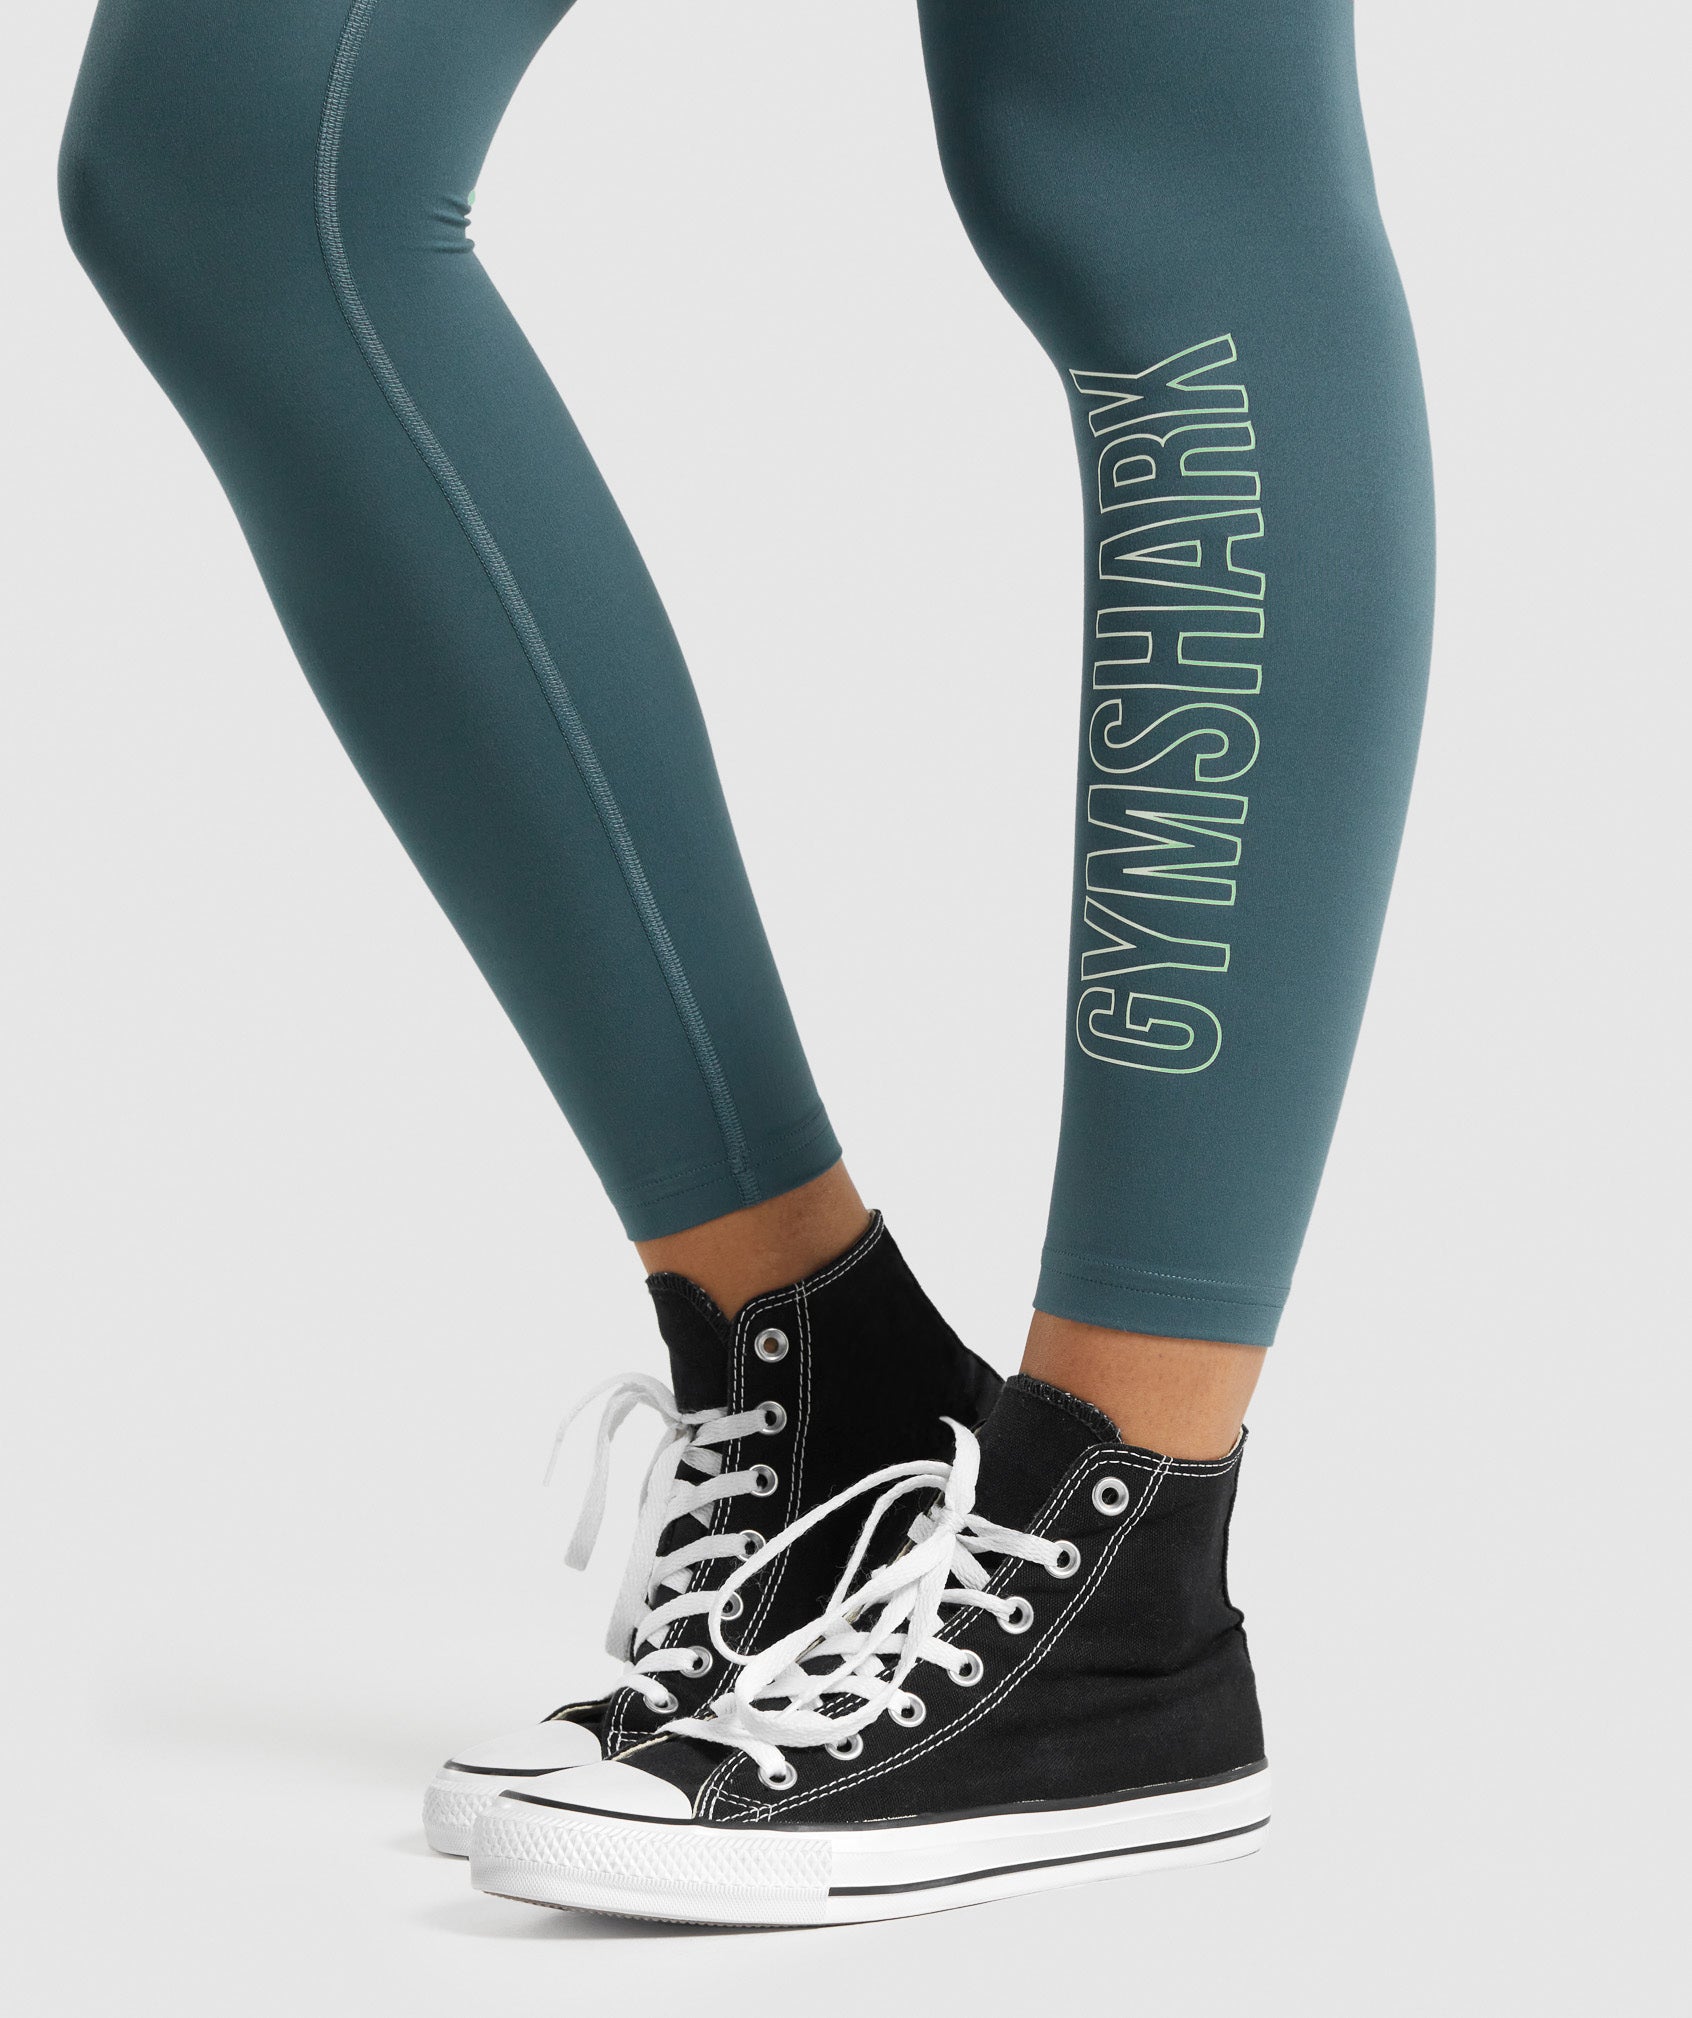 Training Graphic Leggings in Teal - view 6